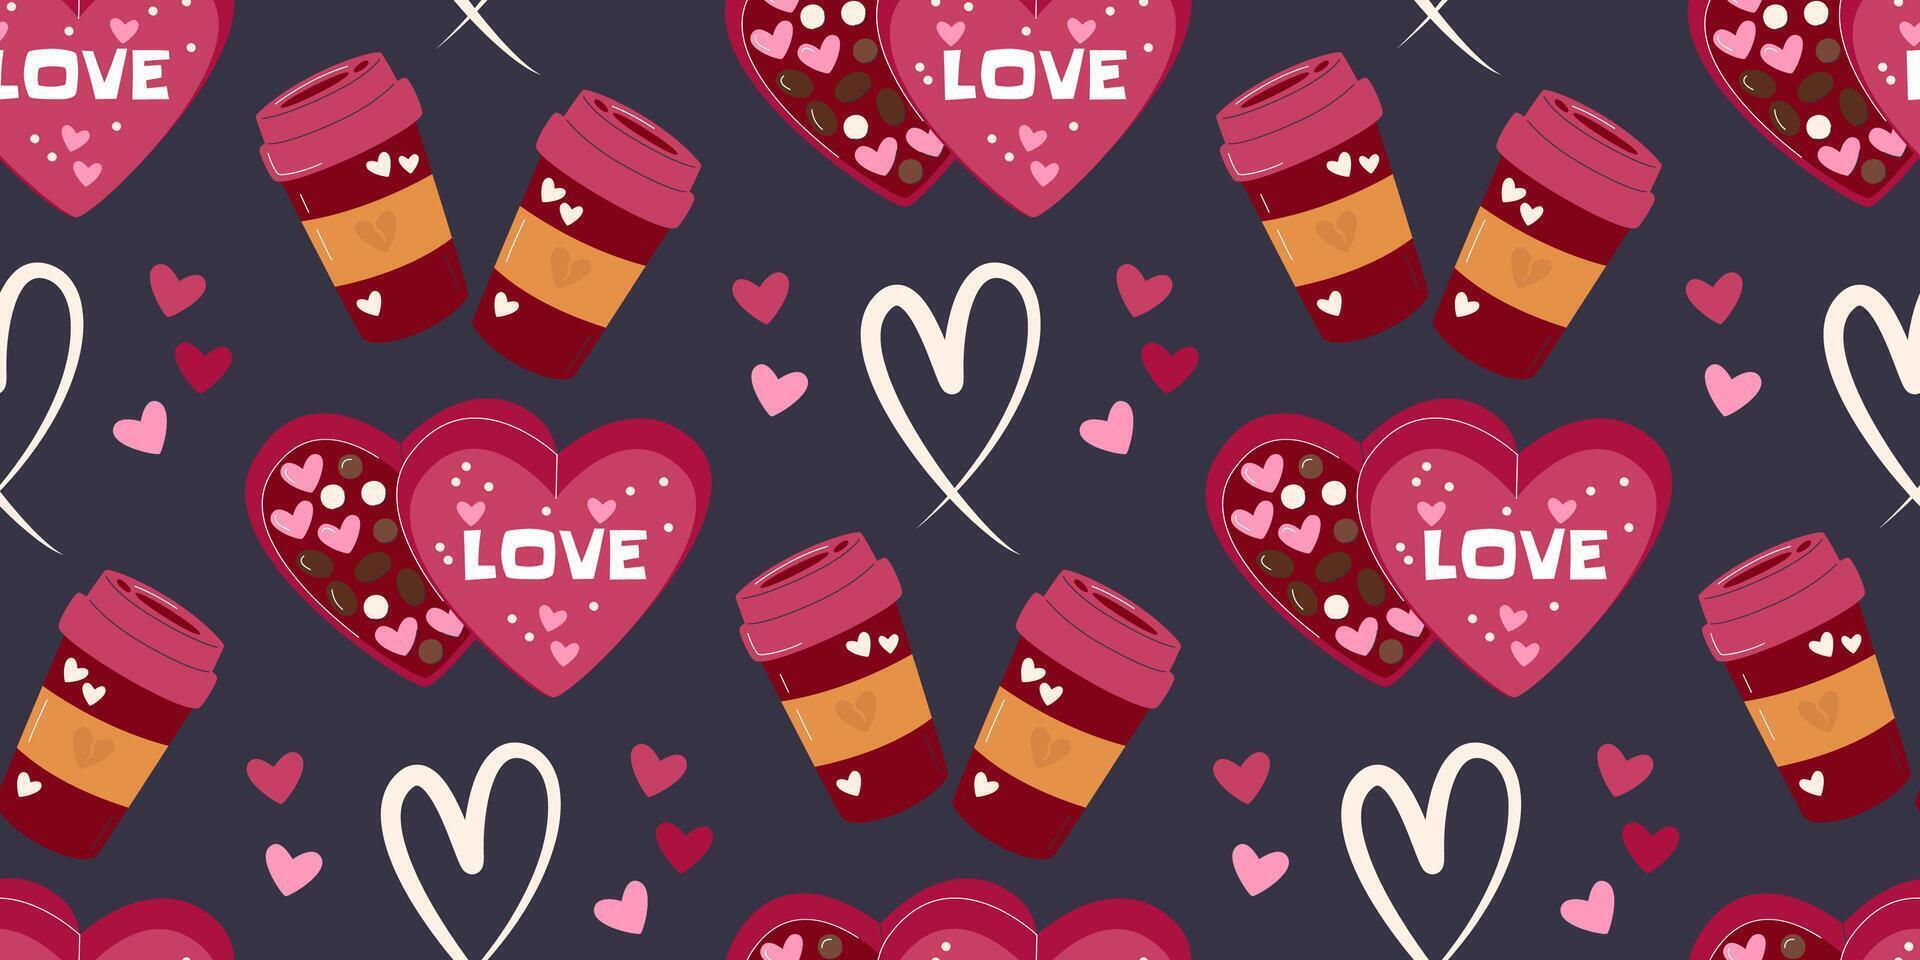 Cute box of chocolates bites and two coffee cups with heart shaped vapor. Sweet food seamless pattern concept design. Valentine's Day hand drawn flat vector illustration isolated on dark background